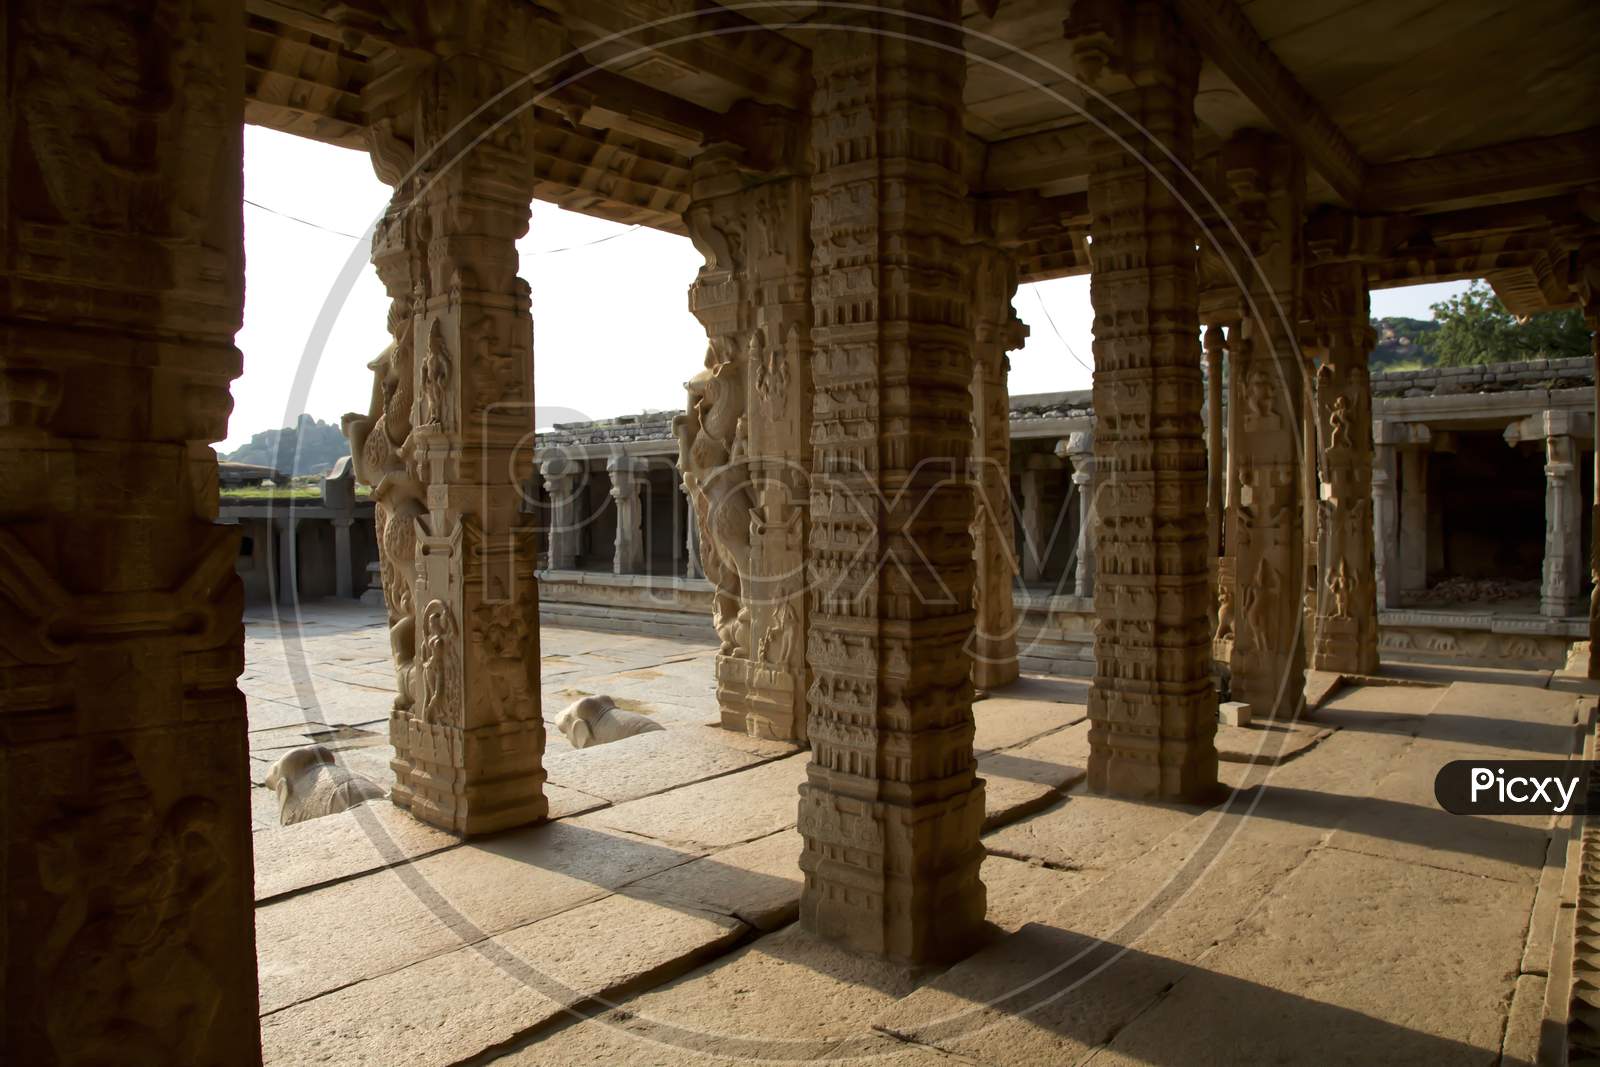 India Columns Of The Vitthala Temple, Hampi, Columns Seen From Inside The Temple At Hampi